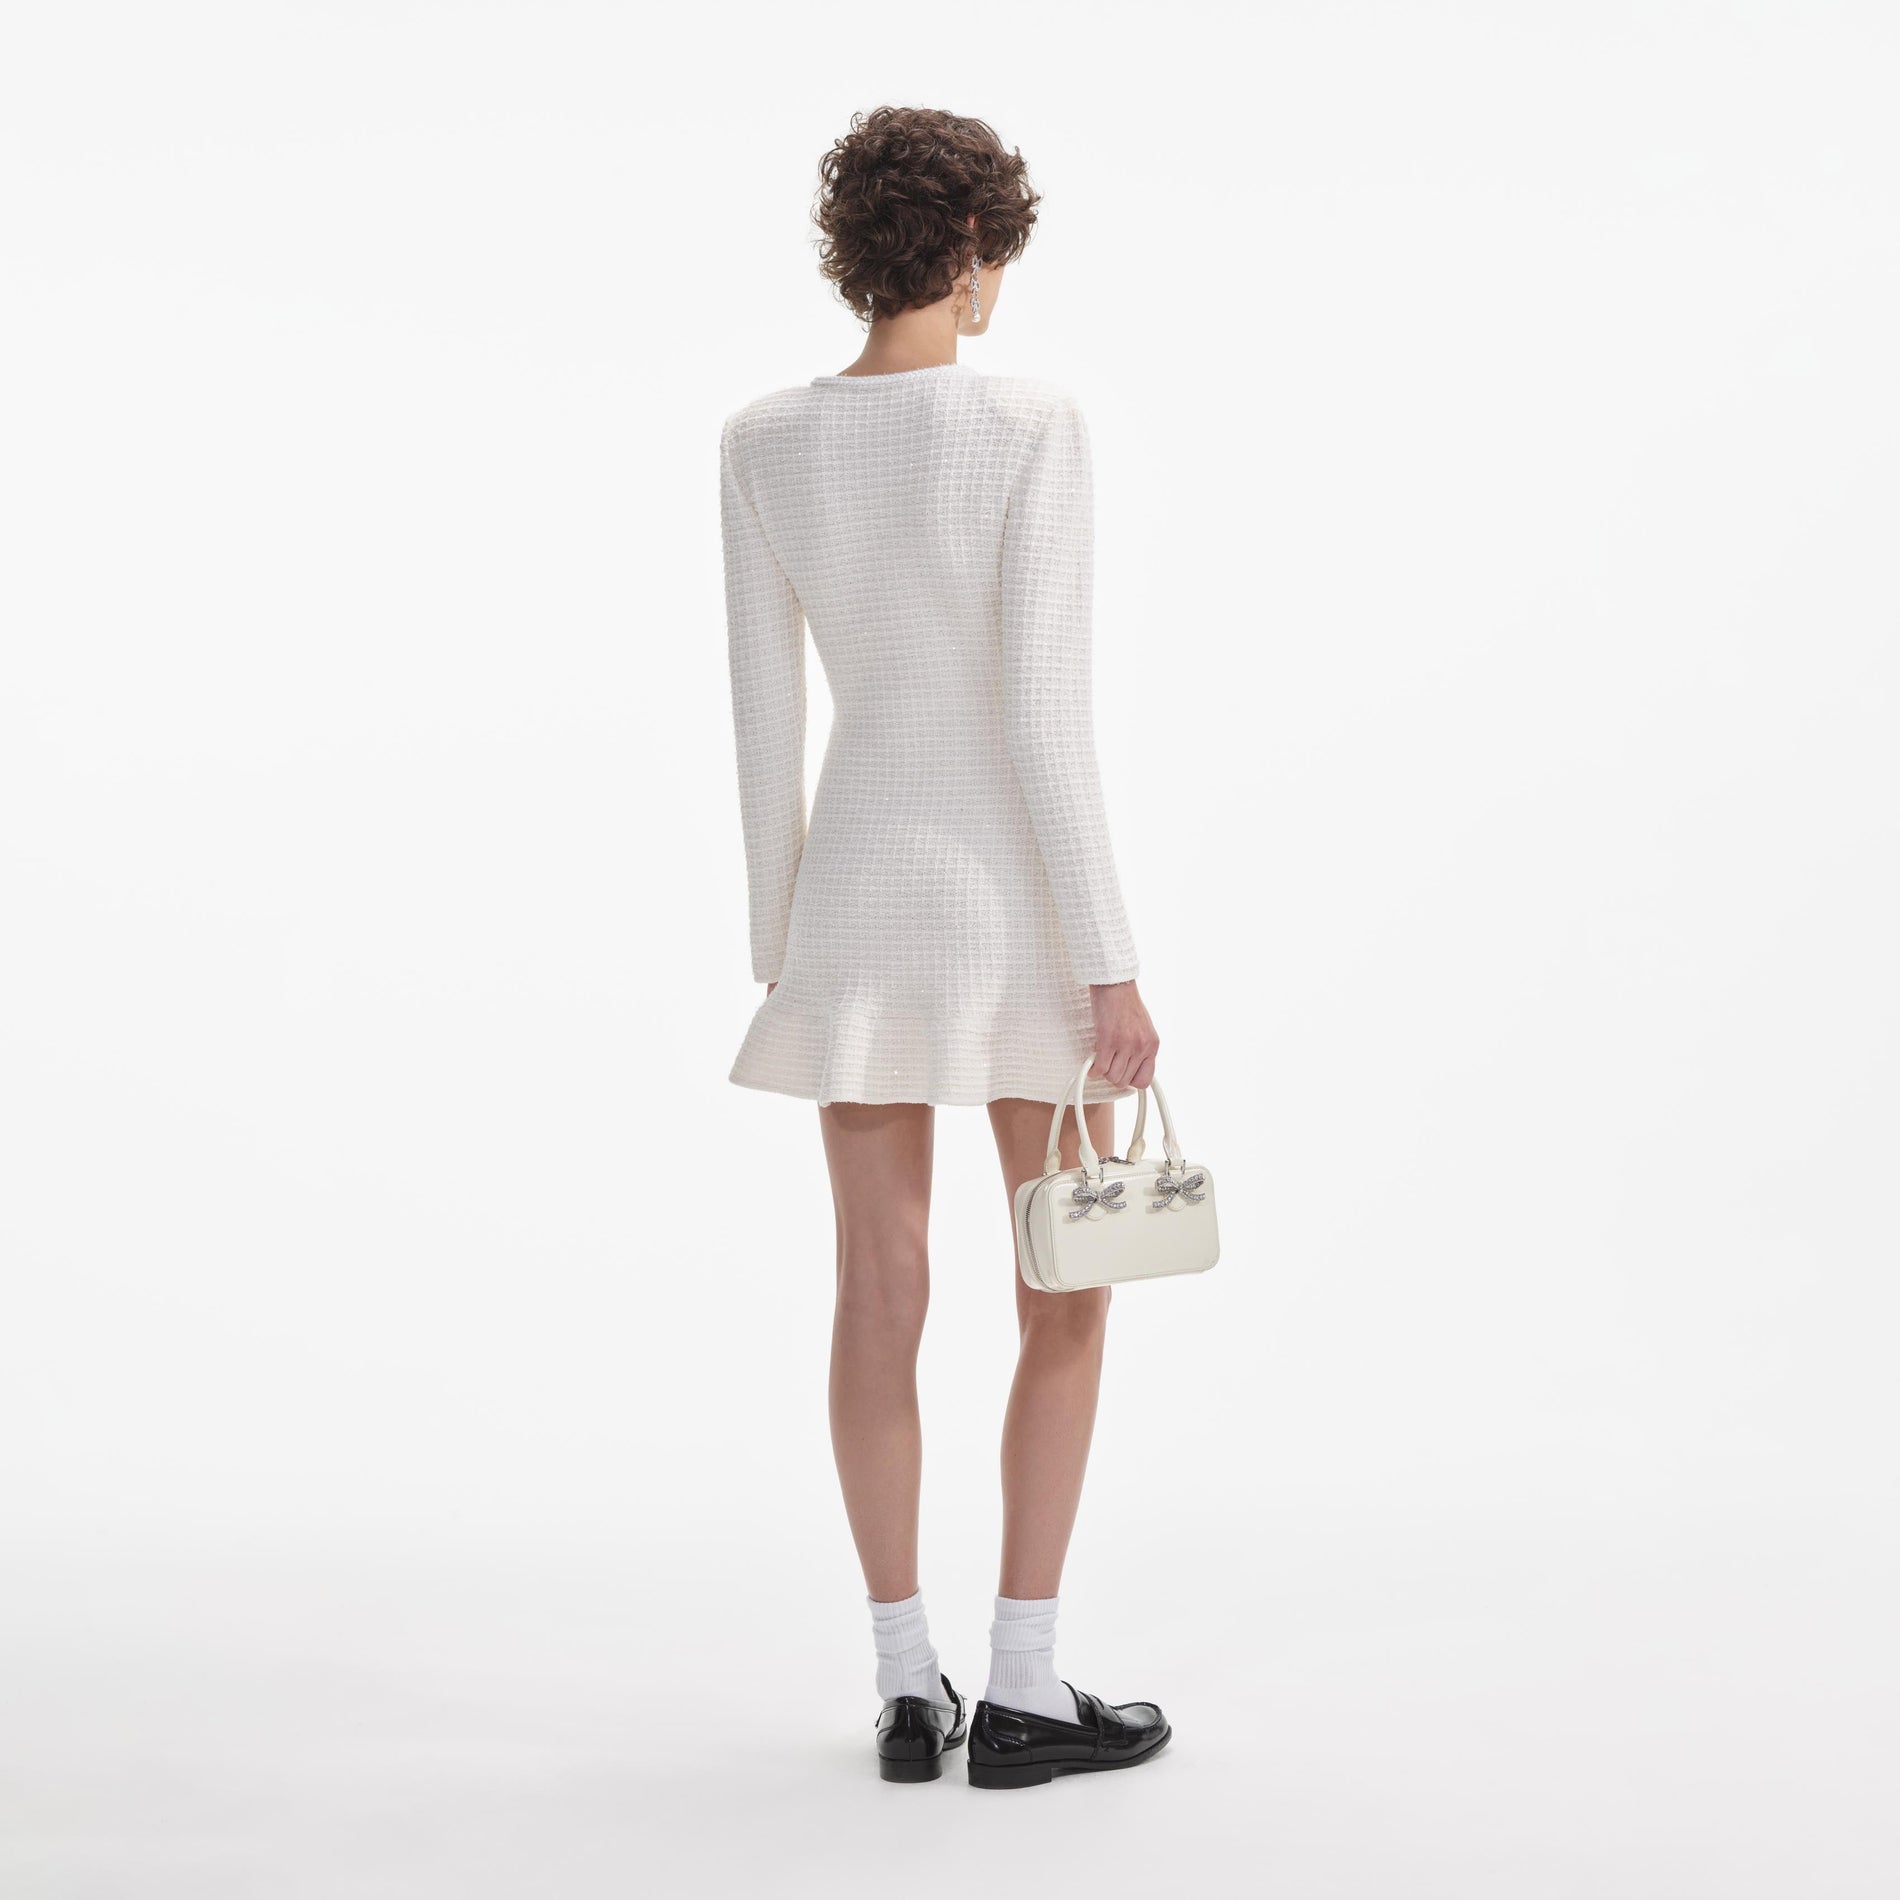 Back view of a woman wearing the White Cream Buttoned Knit Mini Dress